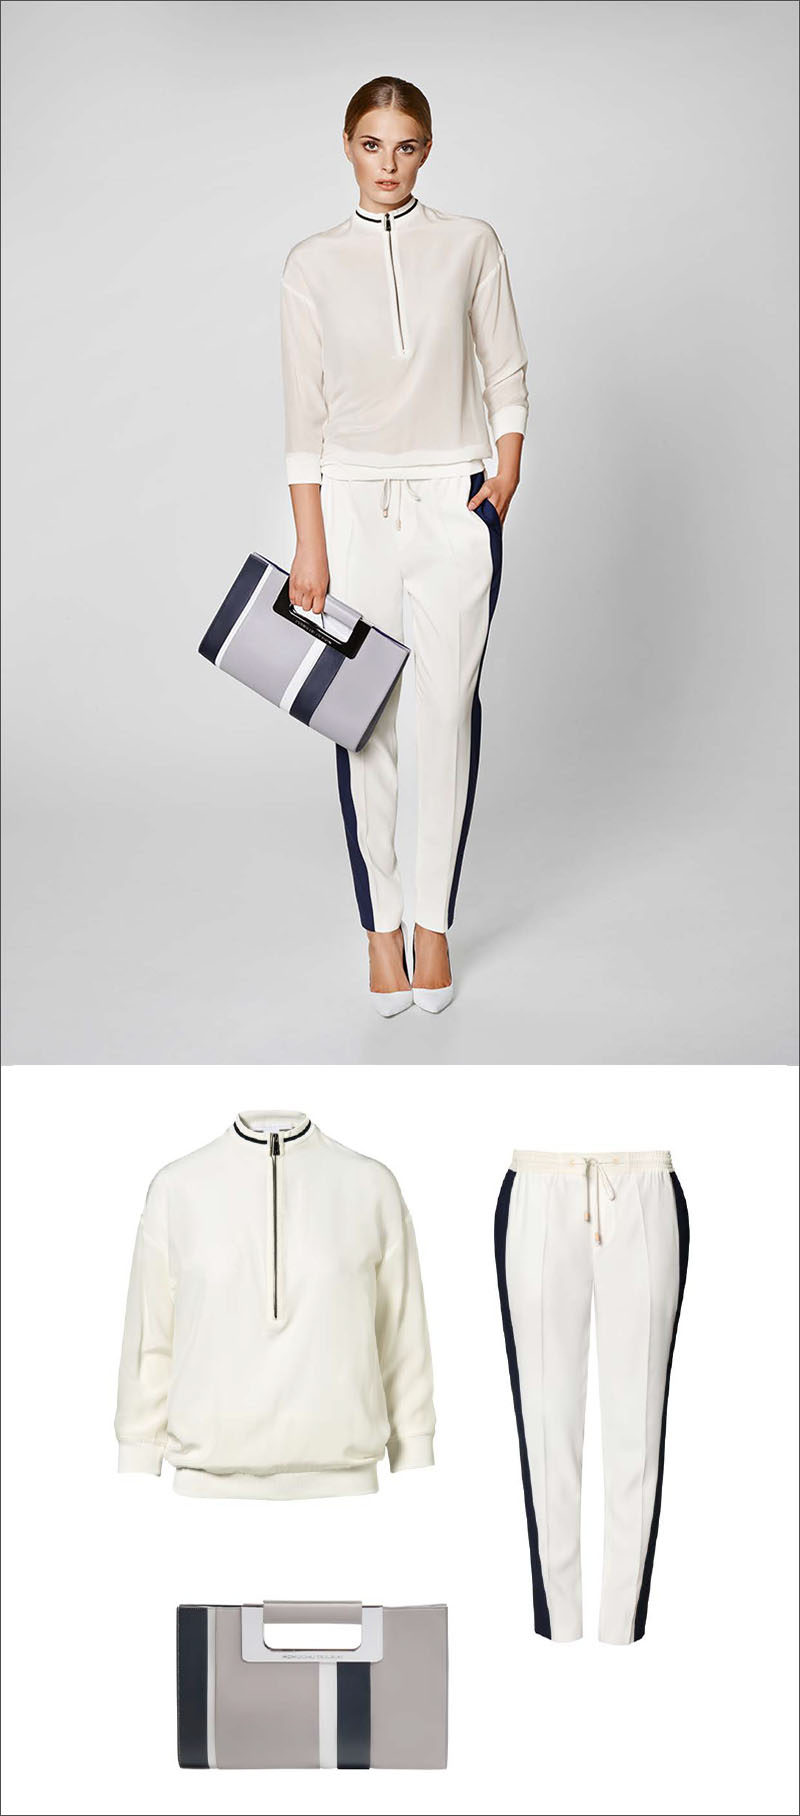 Women's Fashion Ideas - 12 Womens Outfits From Porsche Design's 2017 Spring/Summer Collection // This women's outfit made up of a white blouse, white pants with a navy stripe, and a simple grey and navy clutch, is perfect for a casual spring outing.